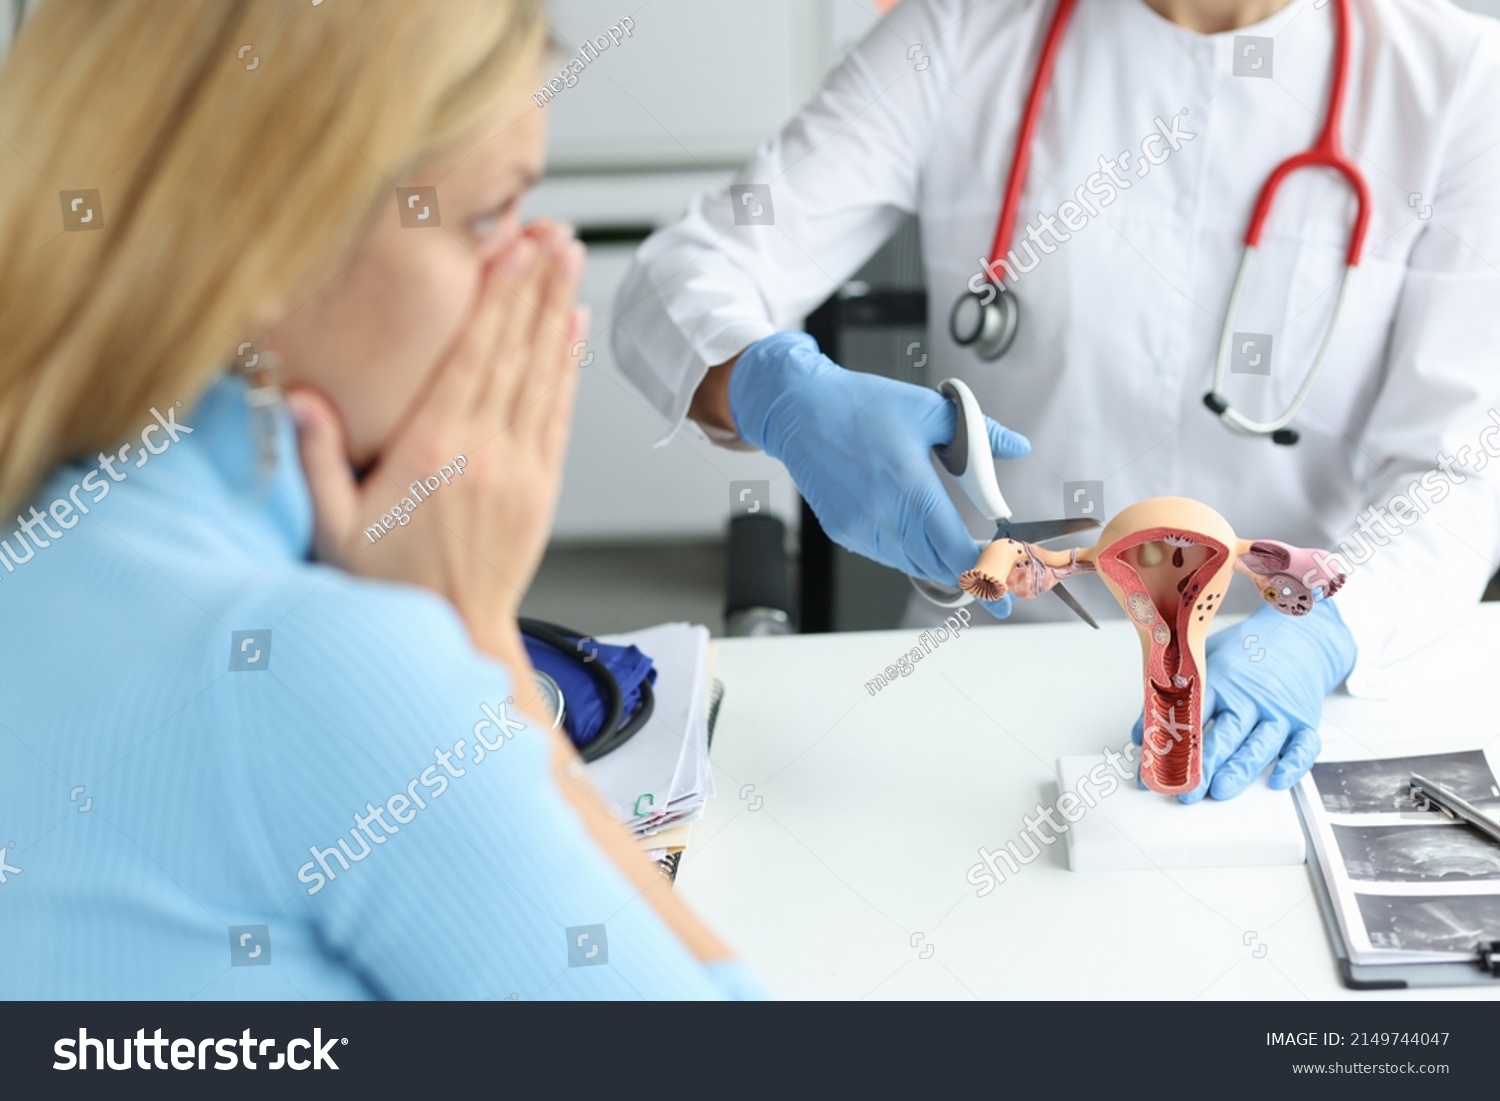 Doctor climbing fallopian tube with scissors onto artificial models on uterus and ovaries in clinic. Infertility obstruction of fallopian tubes concept #2149744047